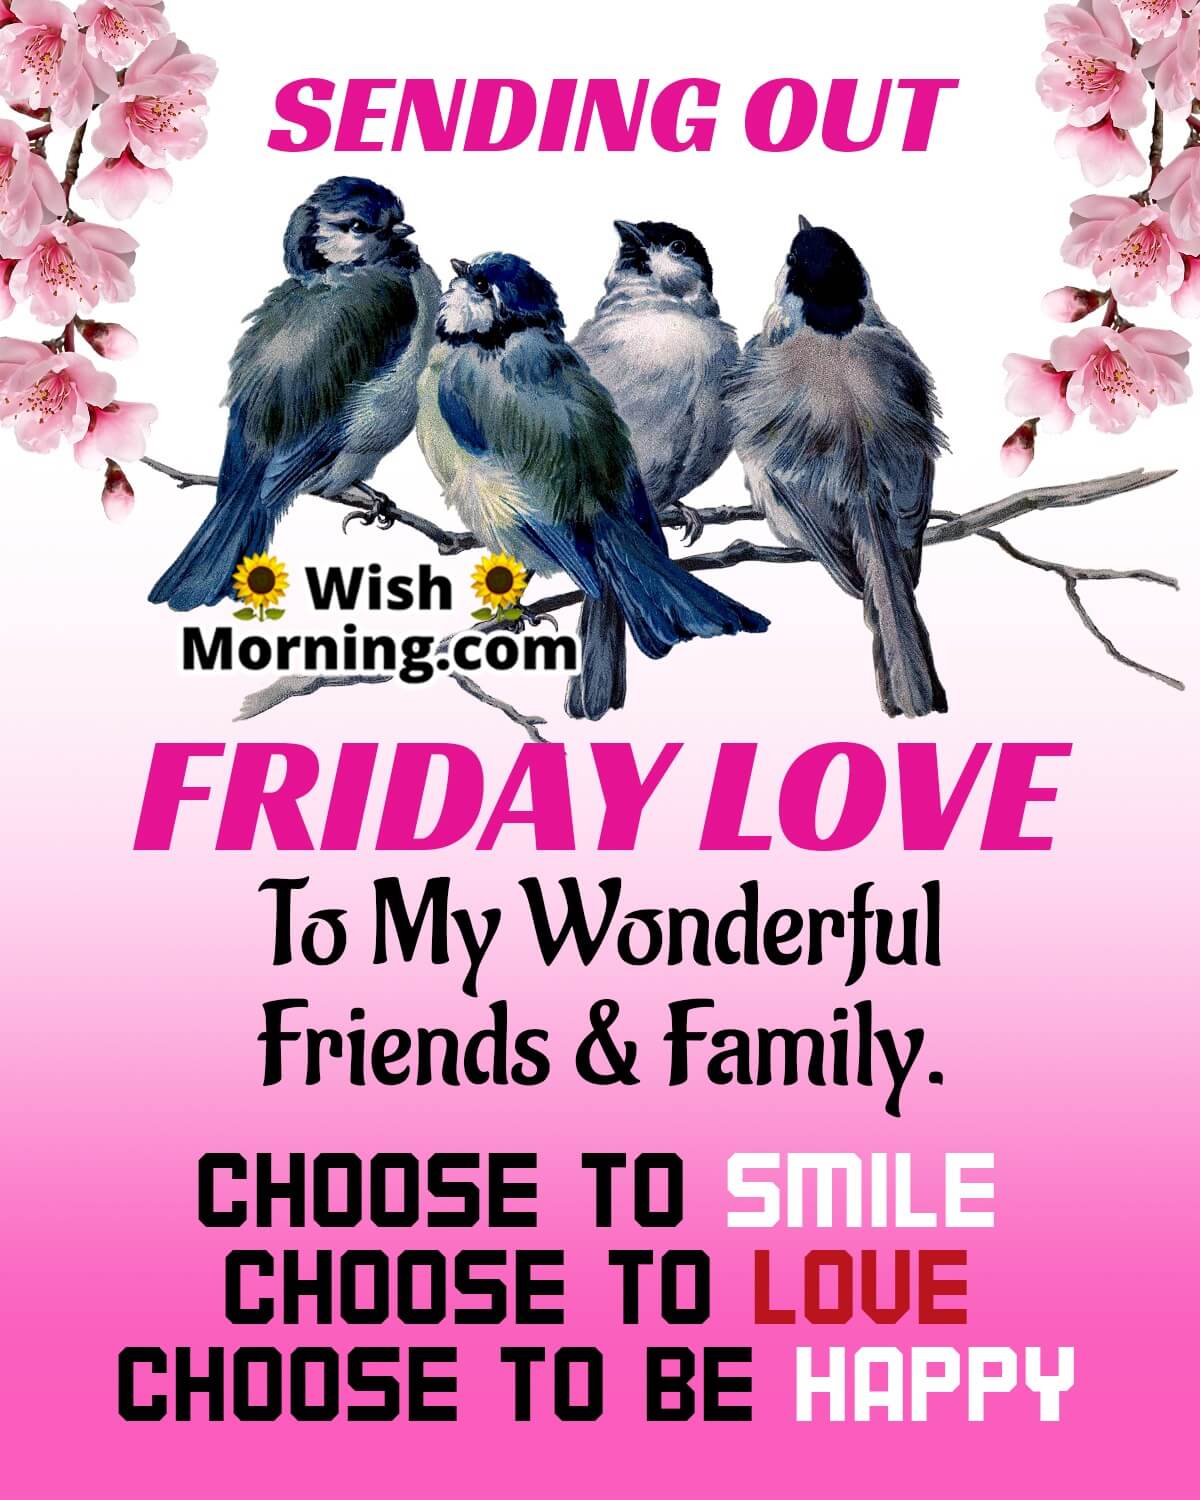 Friday Love To My Friends & Family